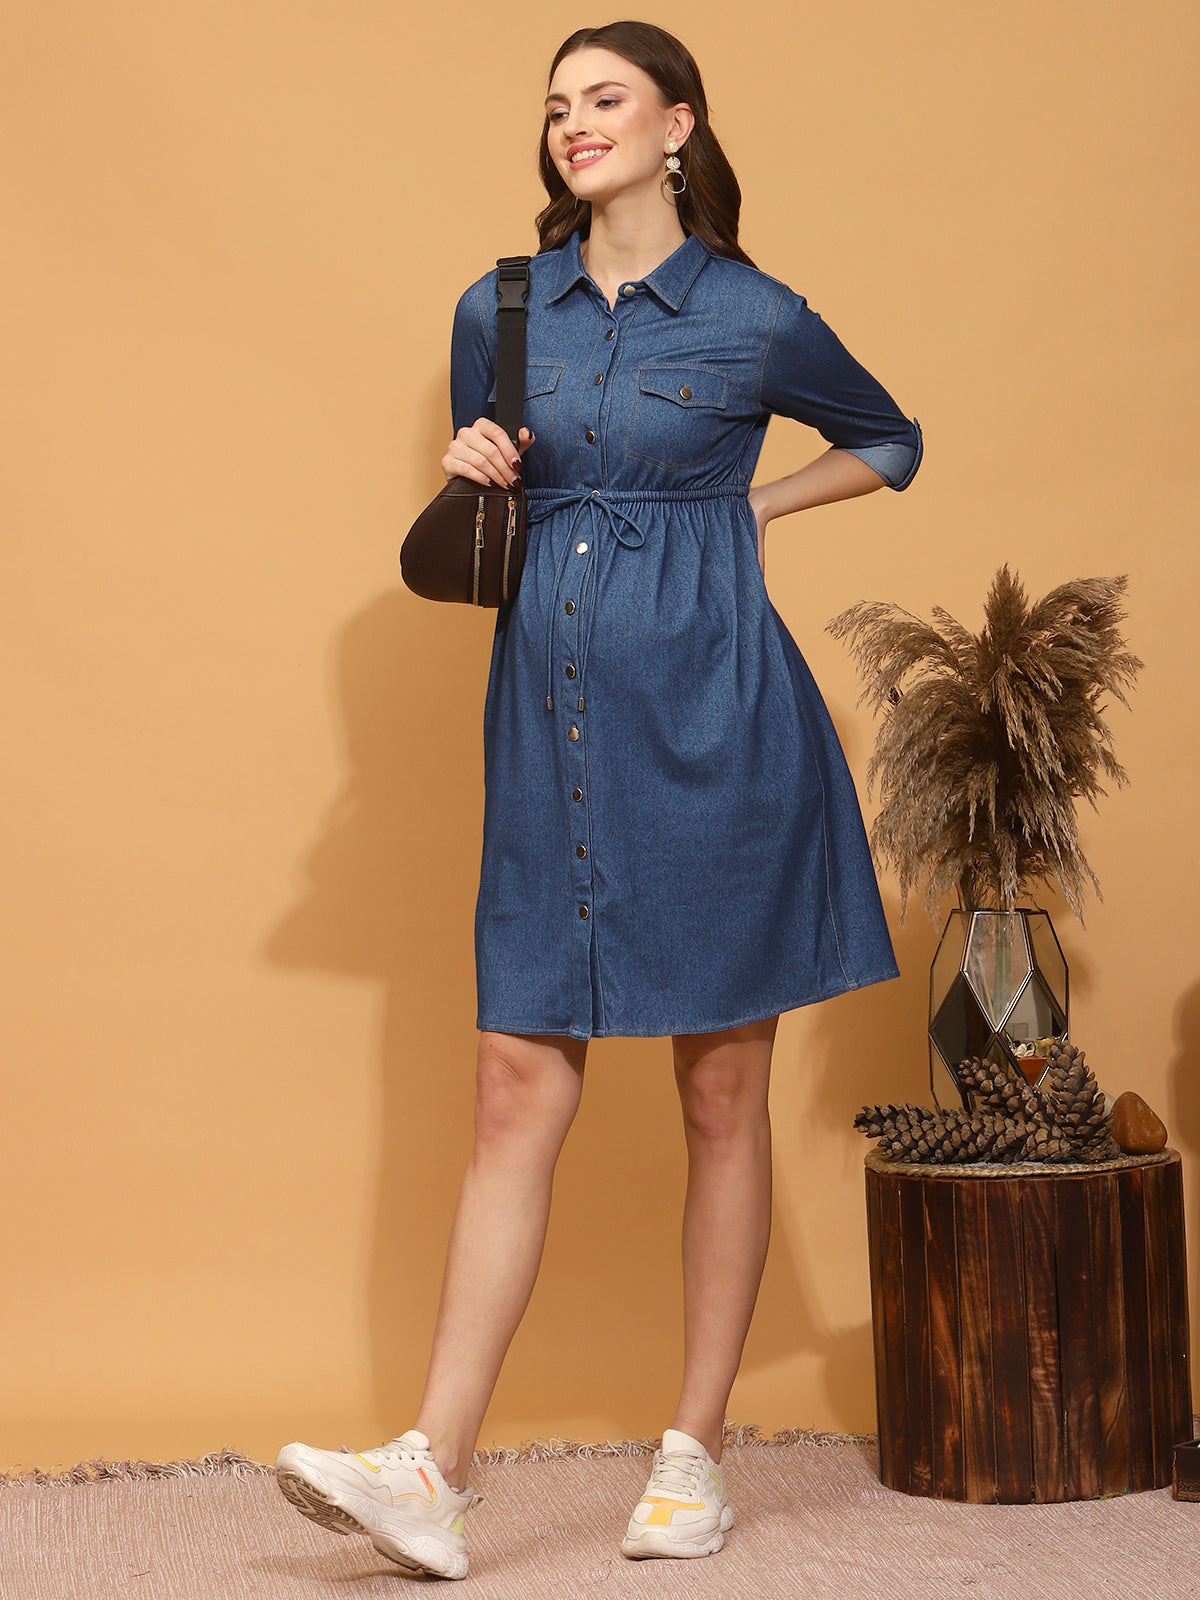 A.P.C. Women's Dresses - Long Sleeve, Sundresses & More | Ready-to-Wear